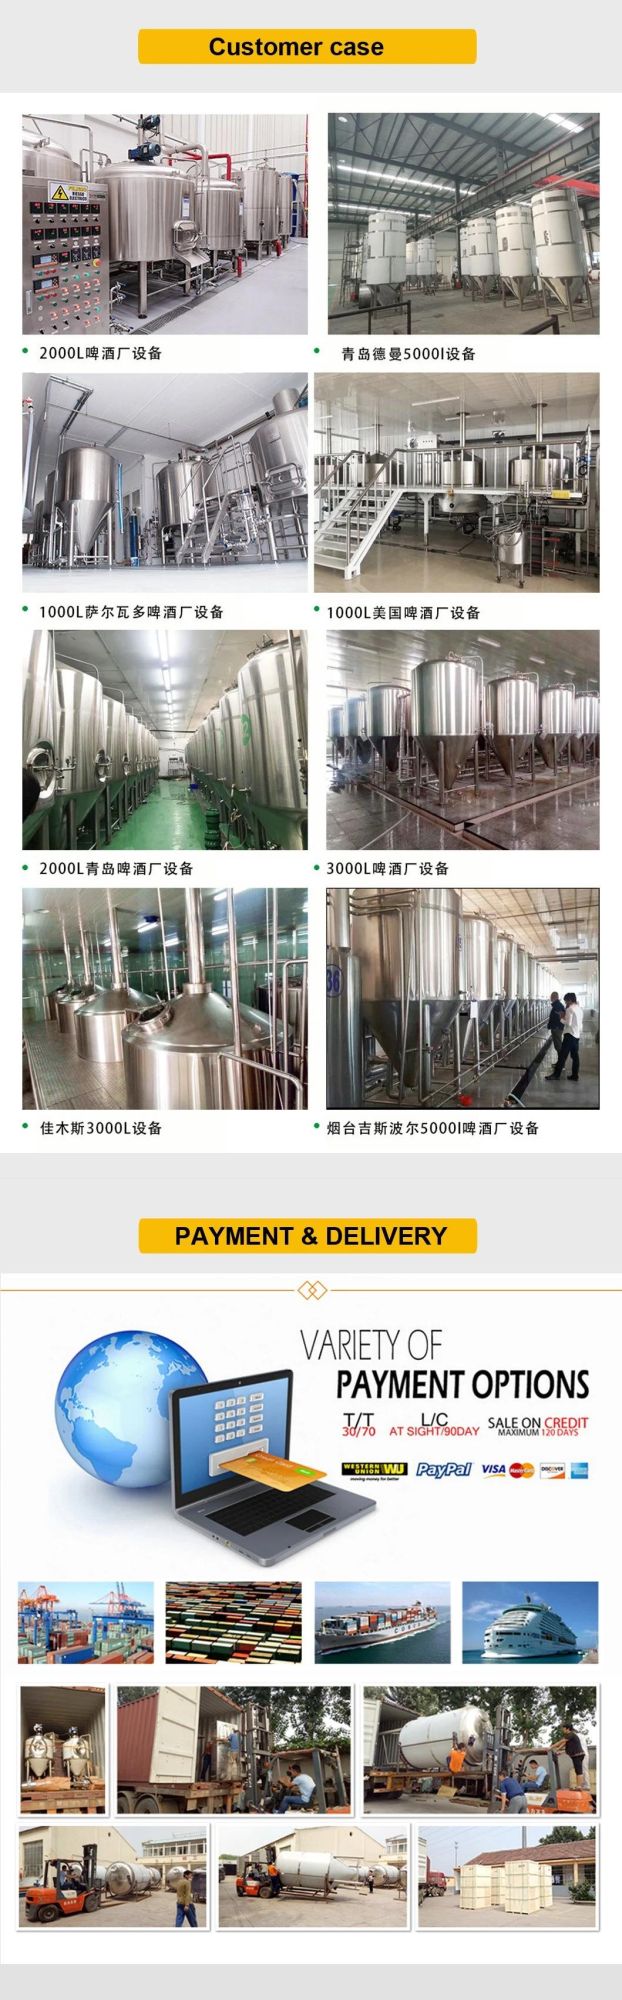 20bbl 25bbl 30bbl Commercial Brewery Brewhouse Industrial Tank ISO UL CE